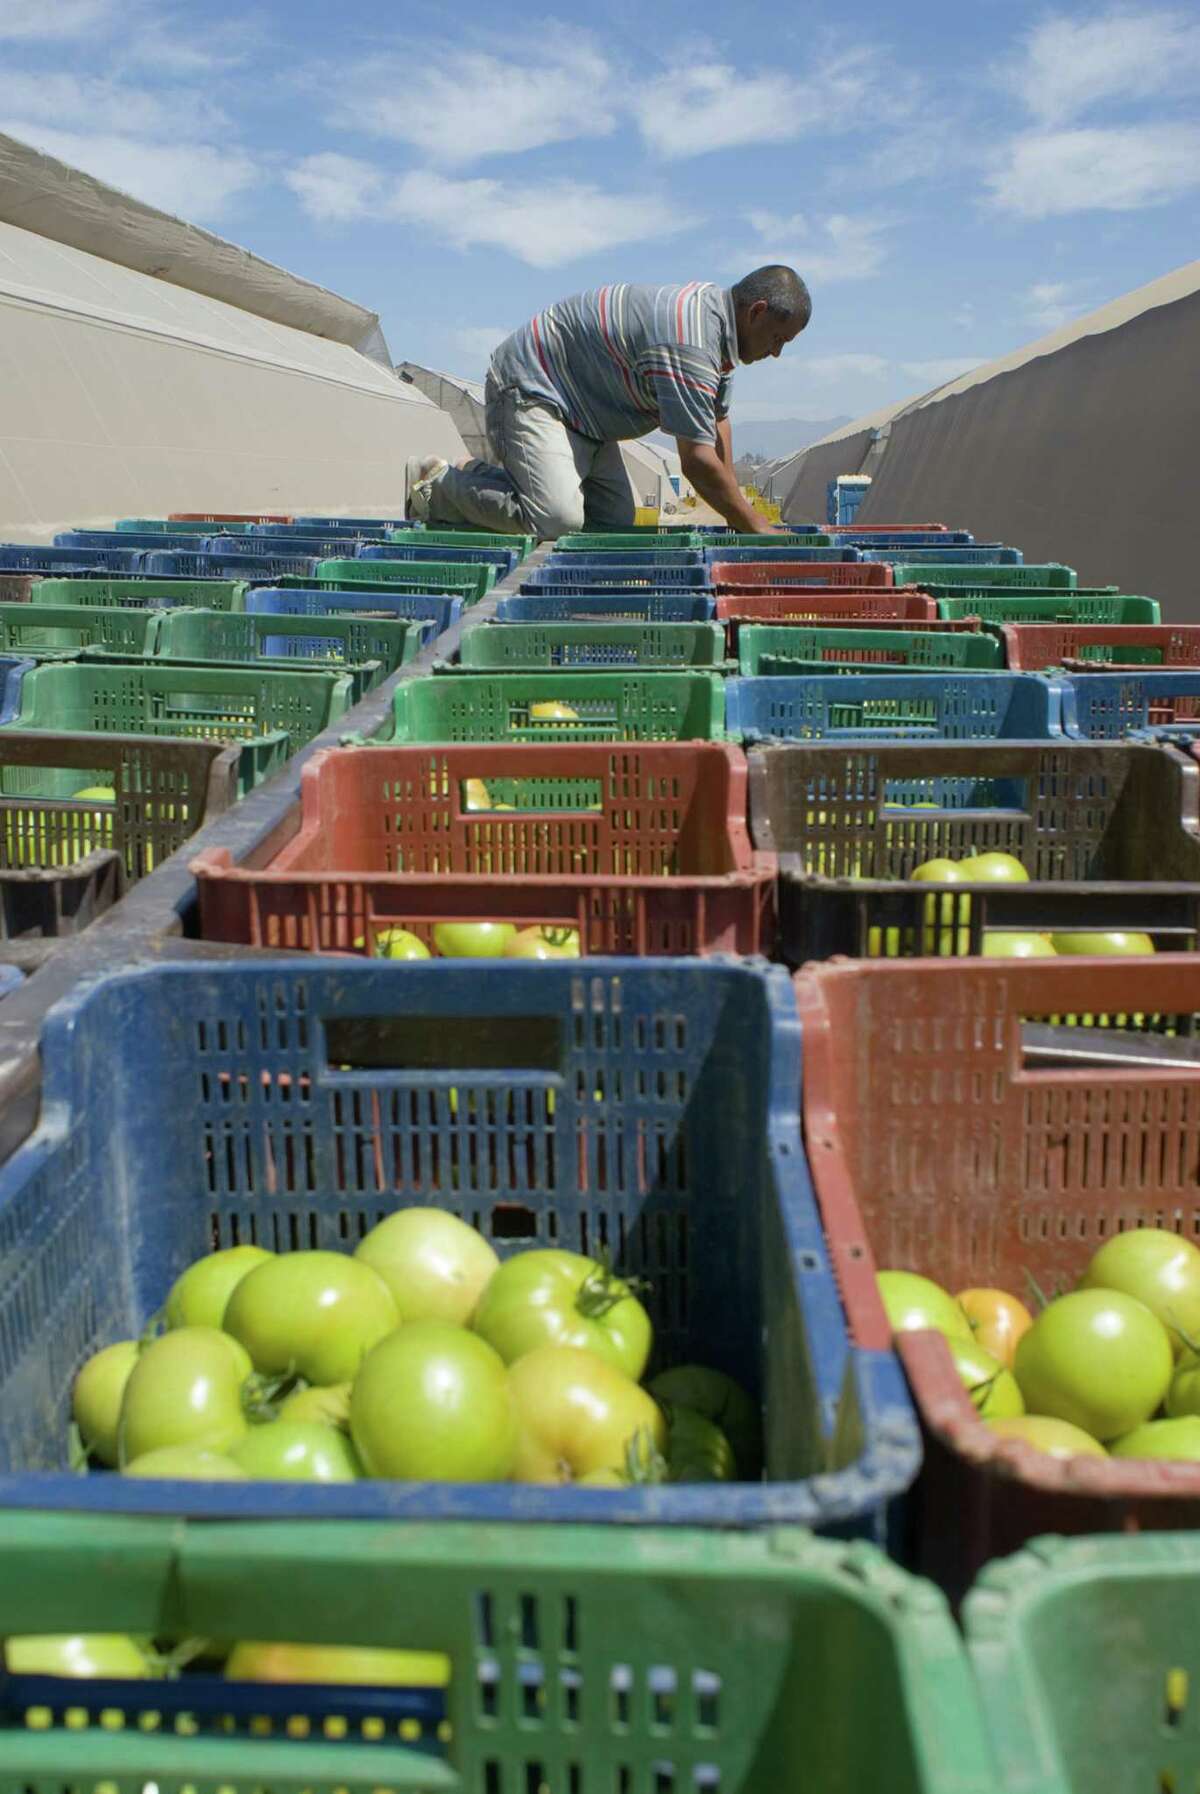 Greenhouses of the Del Campo agricultural complex in Culiacán, México, load boxes of beefsteak tomatoes on flatbed trucks for transport to the packing house.